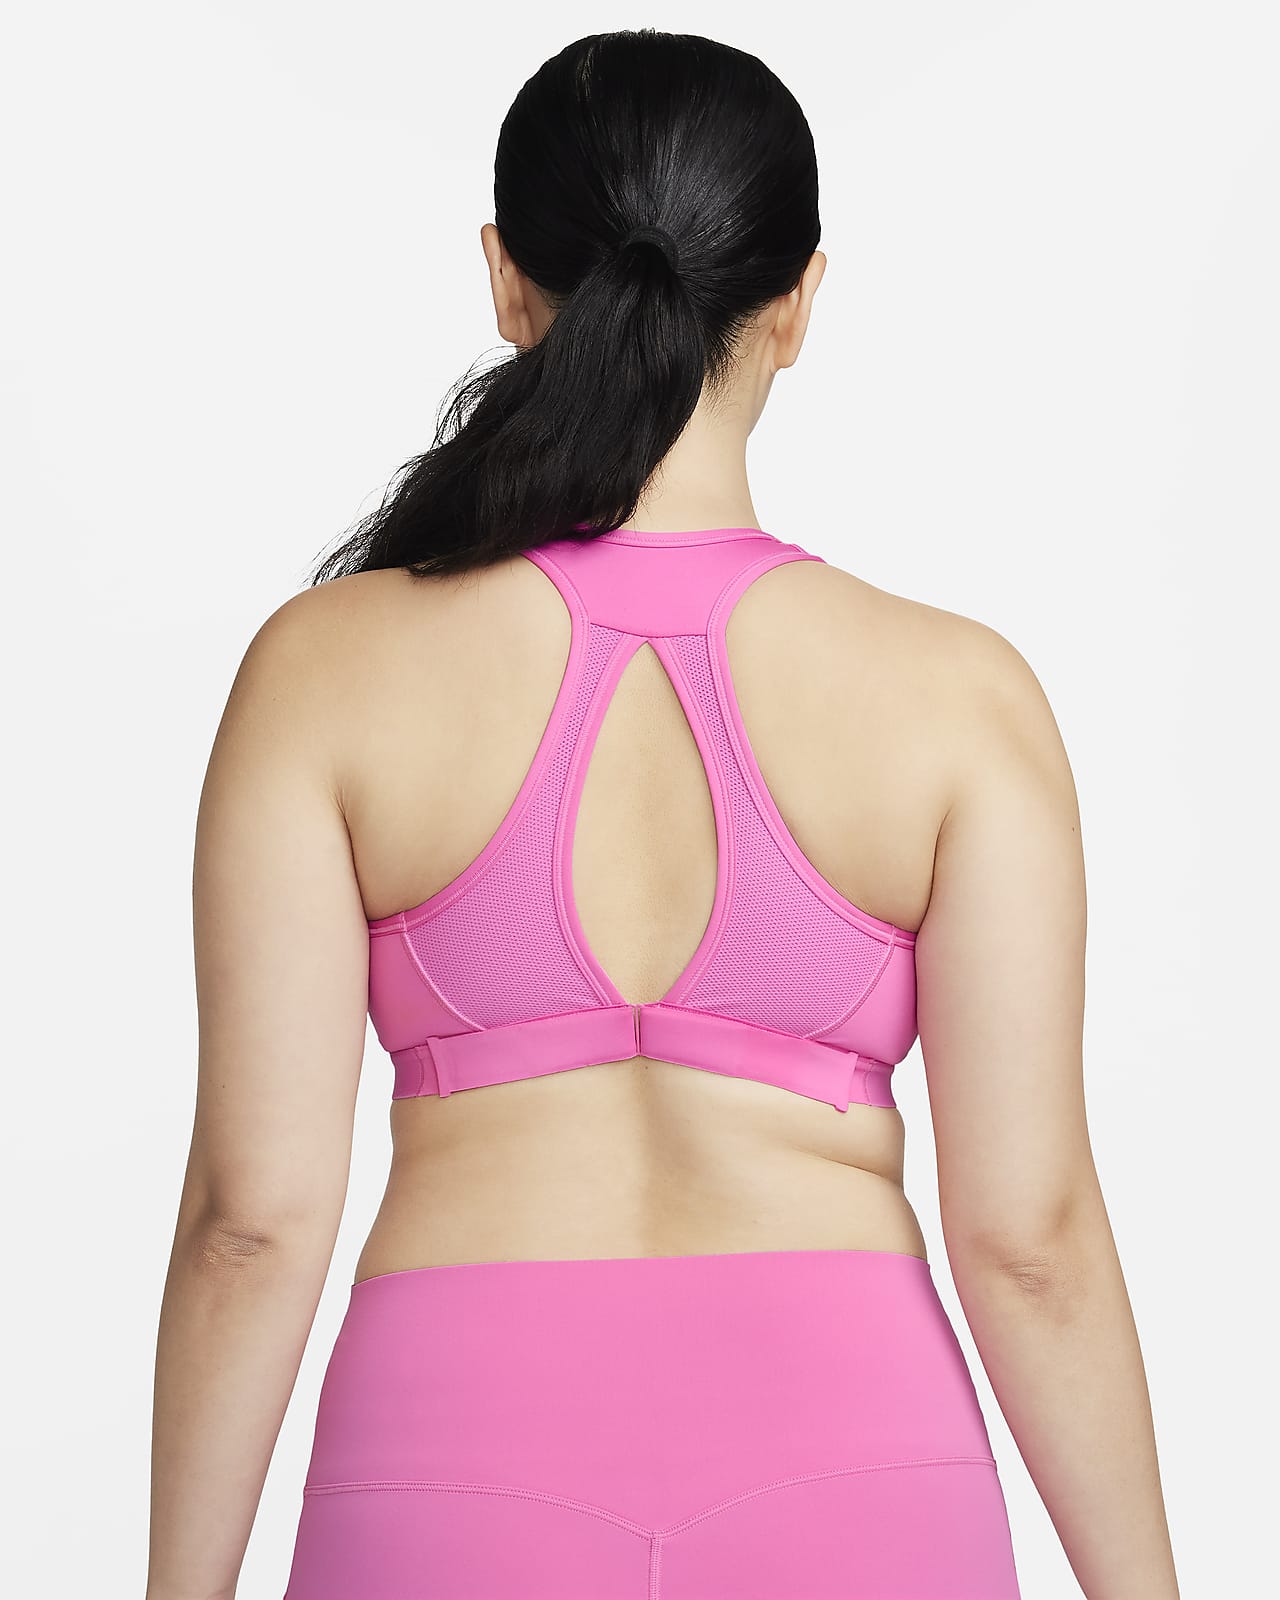 if you have a bigger chest & can never find good supportive sports bra, nike swoosh